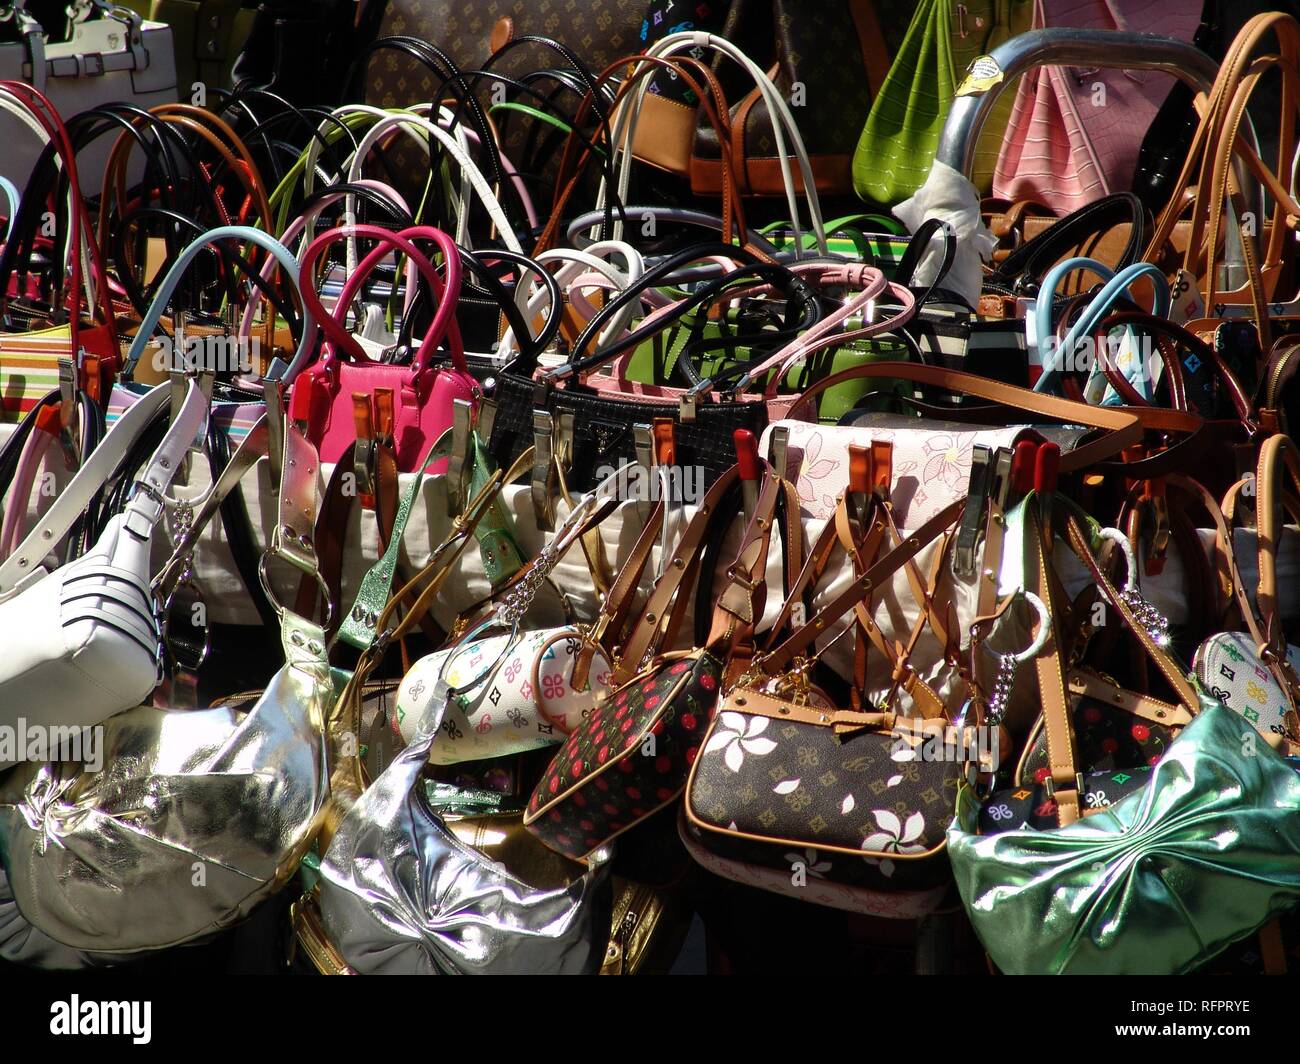 Selling Fake Bags On The Street Rome Italy Stock Photo - Download